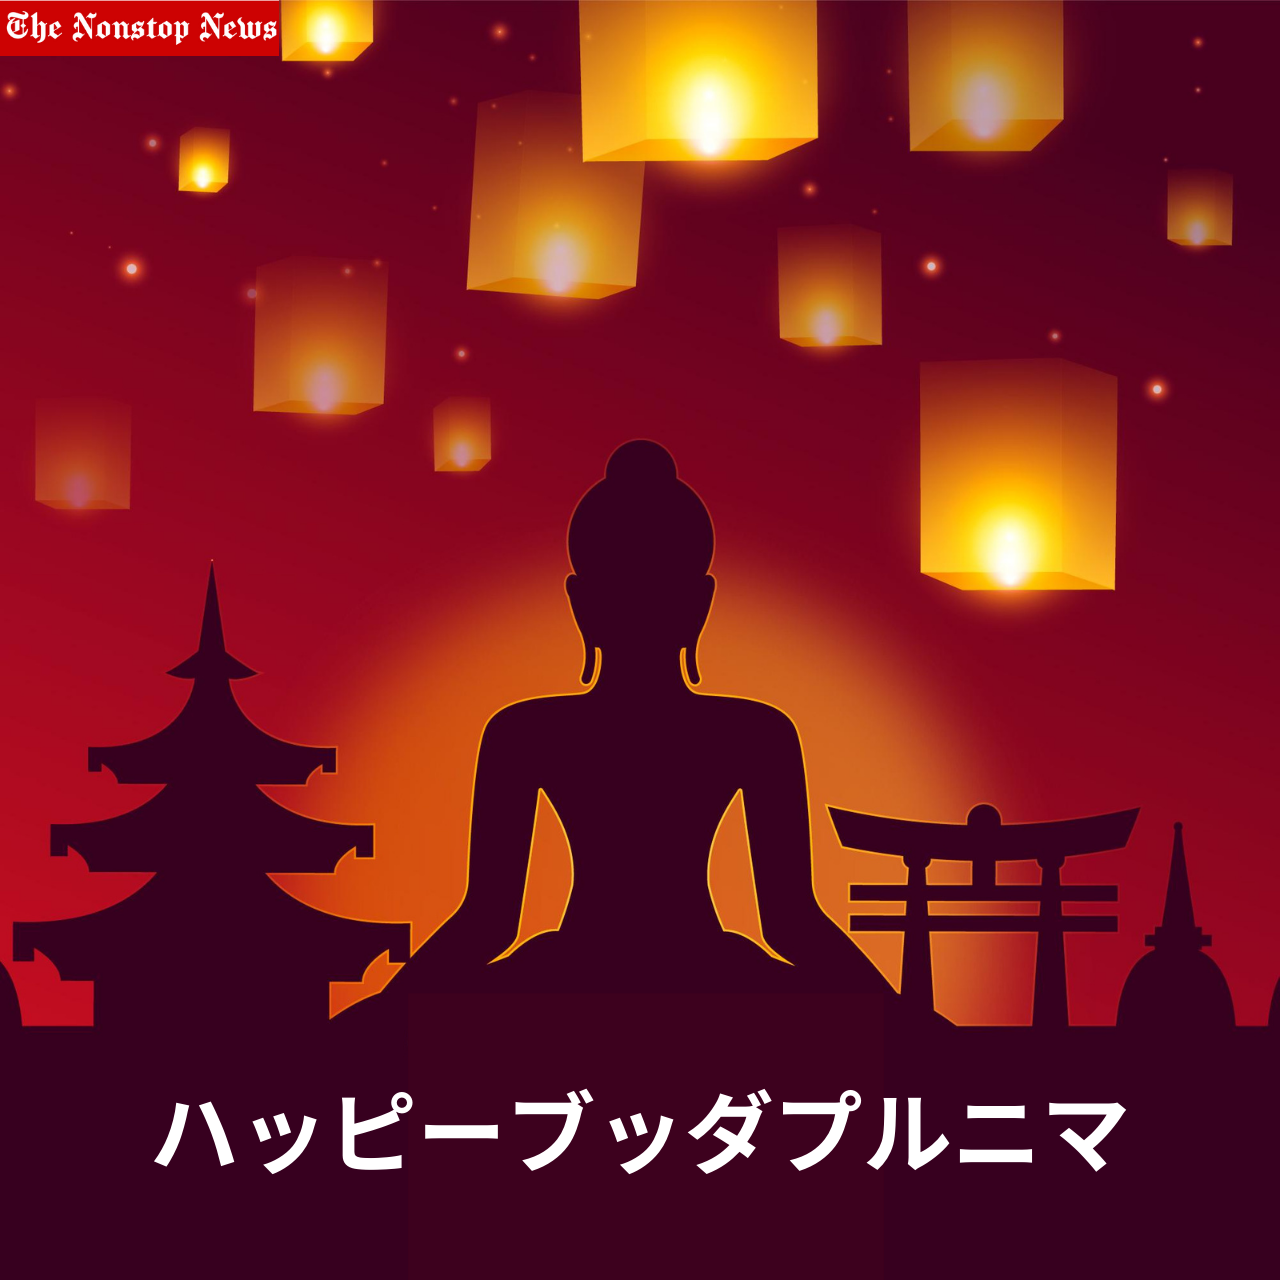 Buddha's Birthday 2021: Japanese Wishes, HD Images, Greetings, Quotes, Status, and WhatsApp Messages to Share